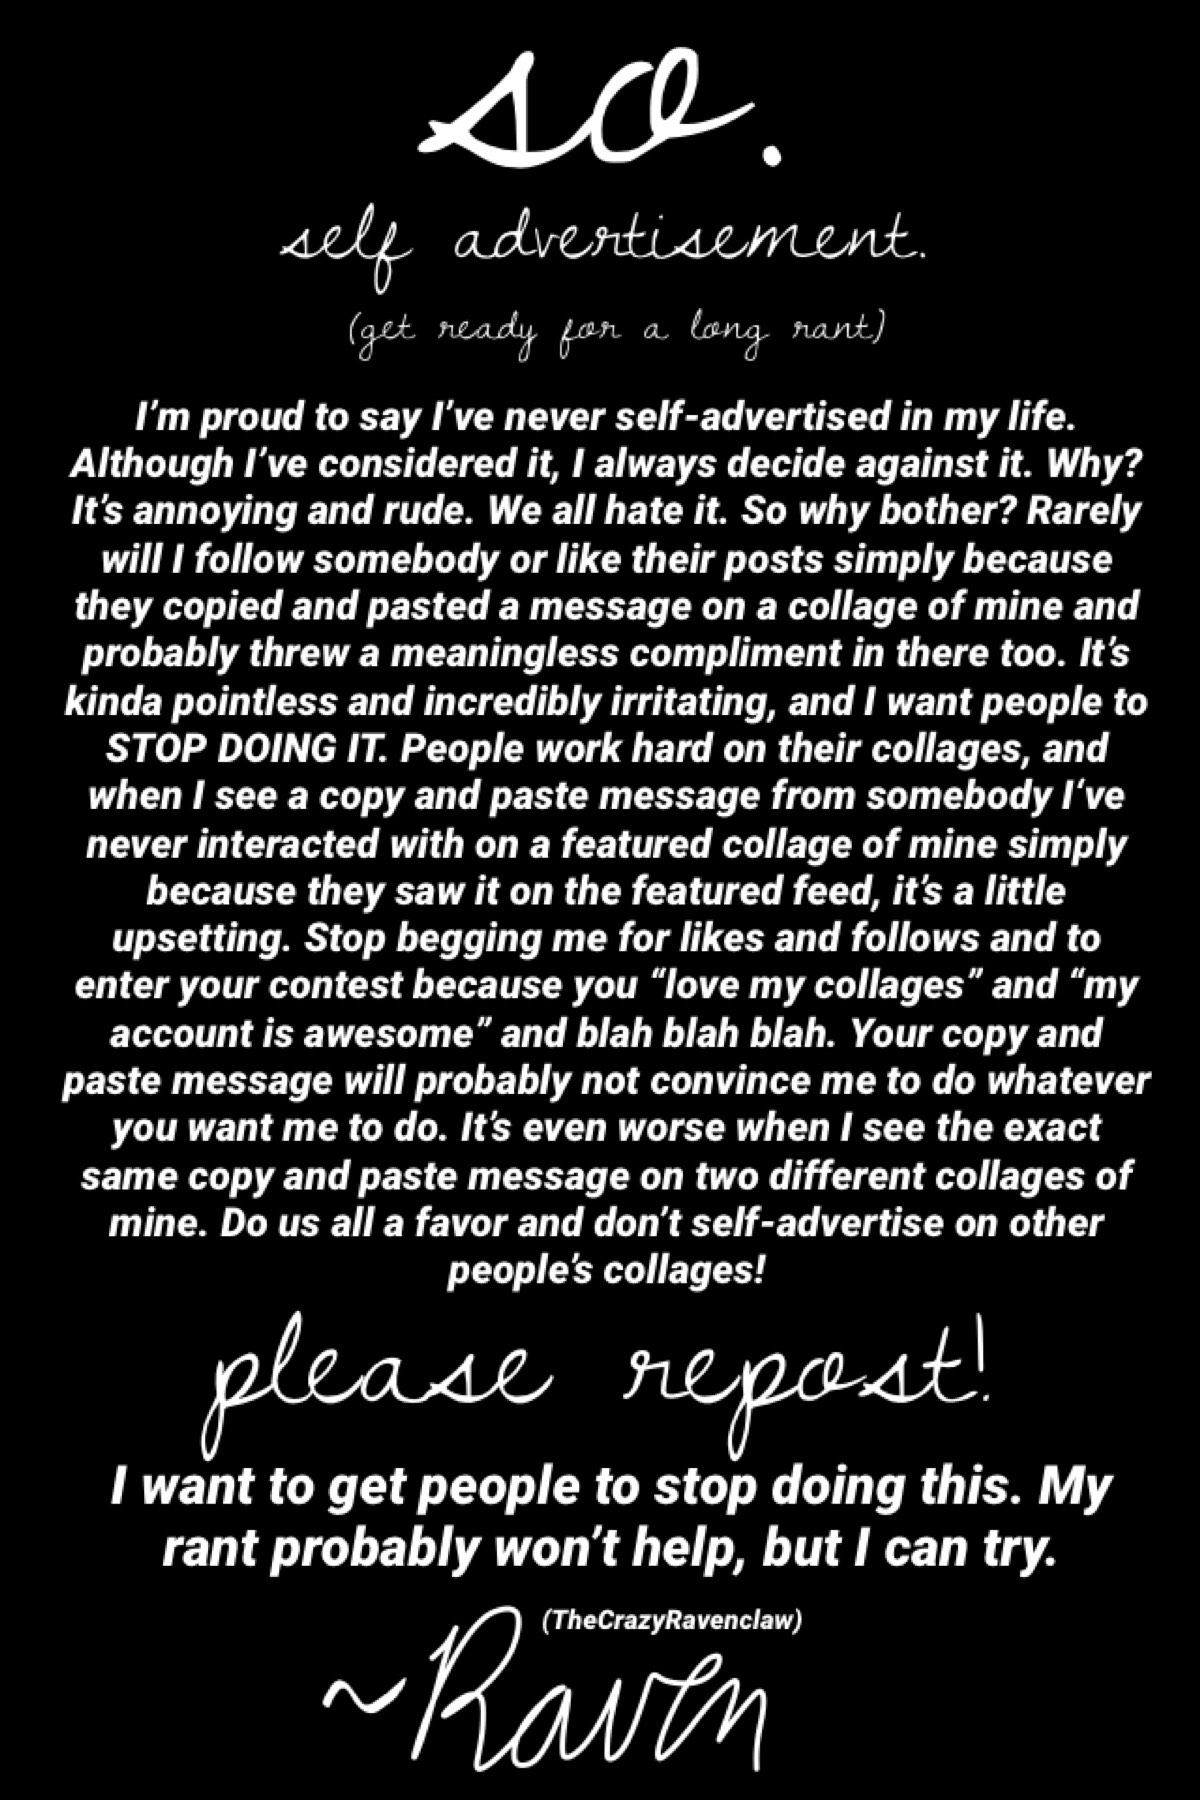 STOP 👏 SELF 👏 ADVERTISING 👏 ITS 👏 SO 👏 ANNOYING

PLEASE REPOST GUYS I CANT STAND SELF ADVERTISEMENT

ok I’m done screaming now 👌

...please repost guys, I’m afraid nobody will 😂😂
